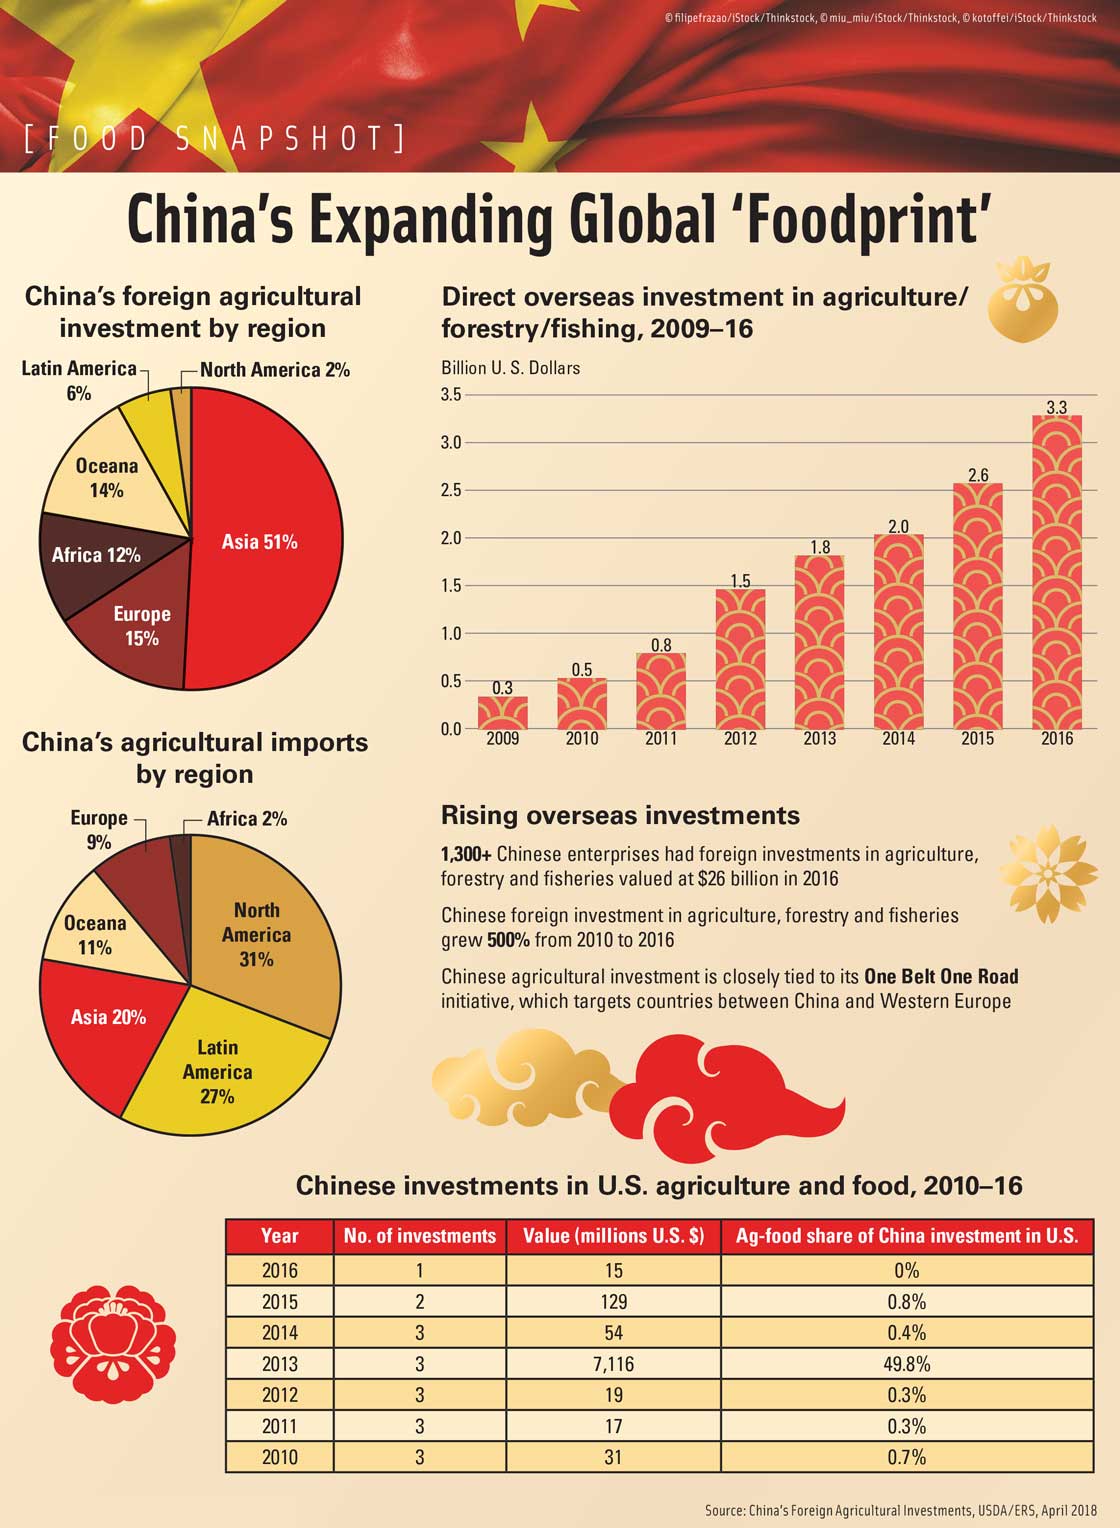 China’s Expanding Global ‘Foodprint’. Source: China’s Foreign Agricultural Investments, USDA/ERS, April 2018